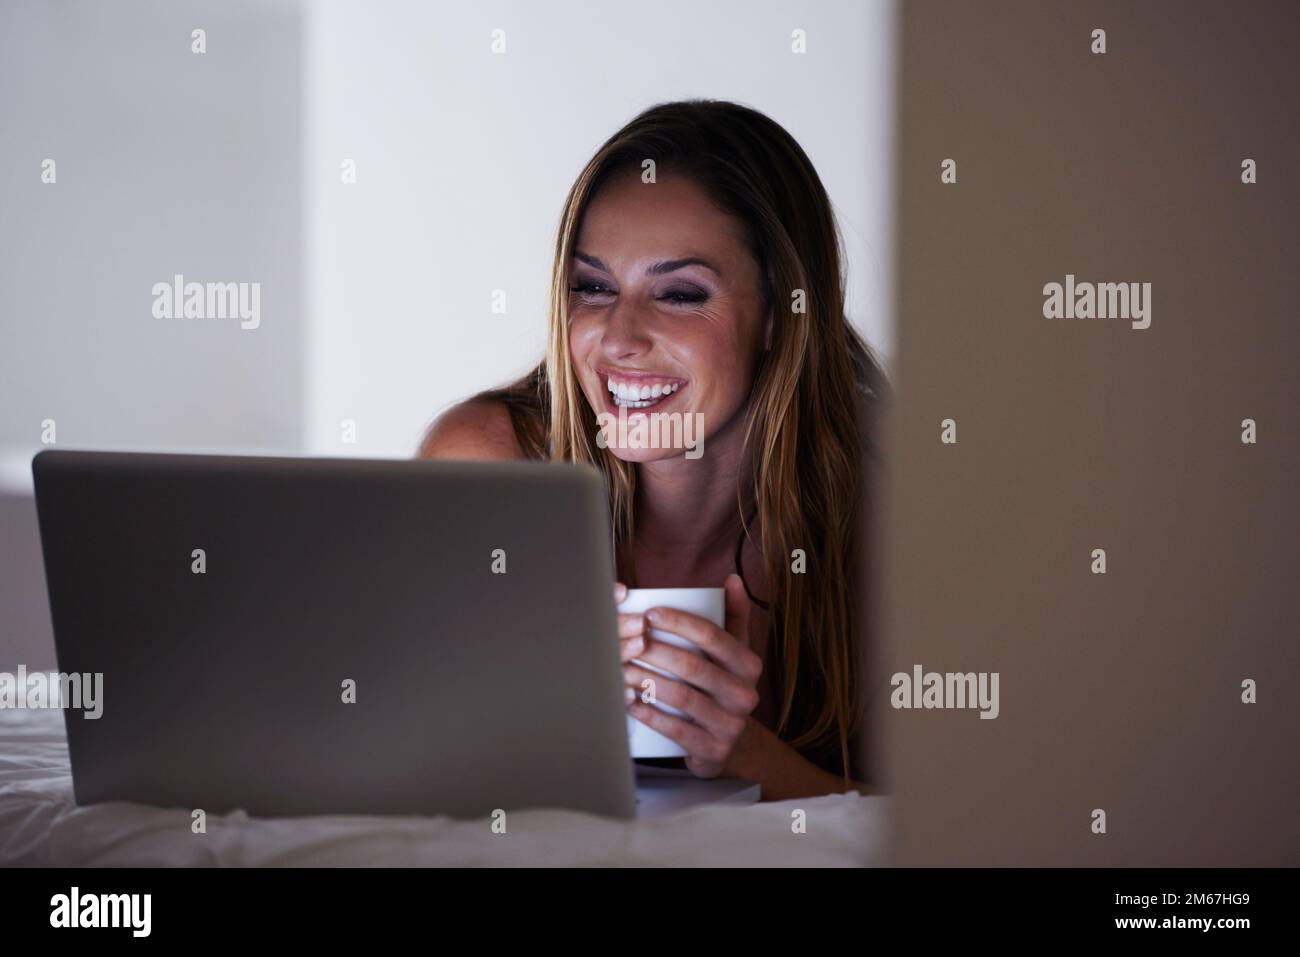 Connected from the comfort of home. A beautiful woman using her laptop from the comfort of her bed. Stock Photo